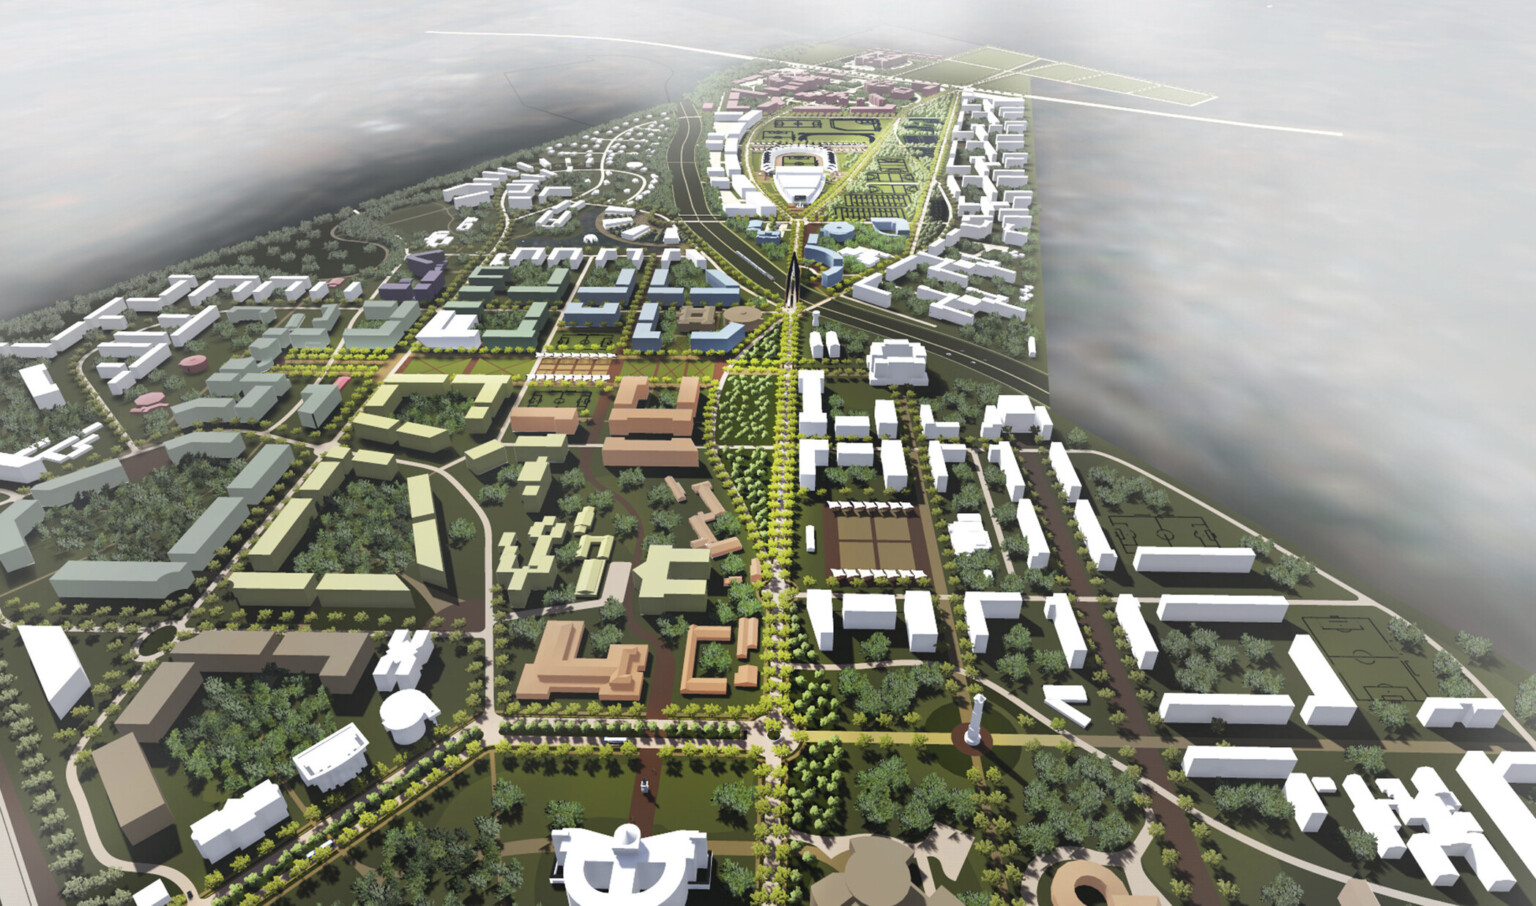 aerial view for rendered design concept of designated area for building expansion, outlines of buildings, greenery, roads